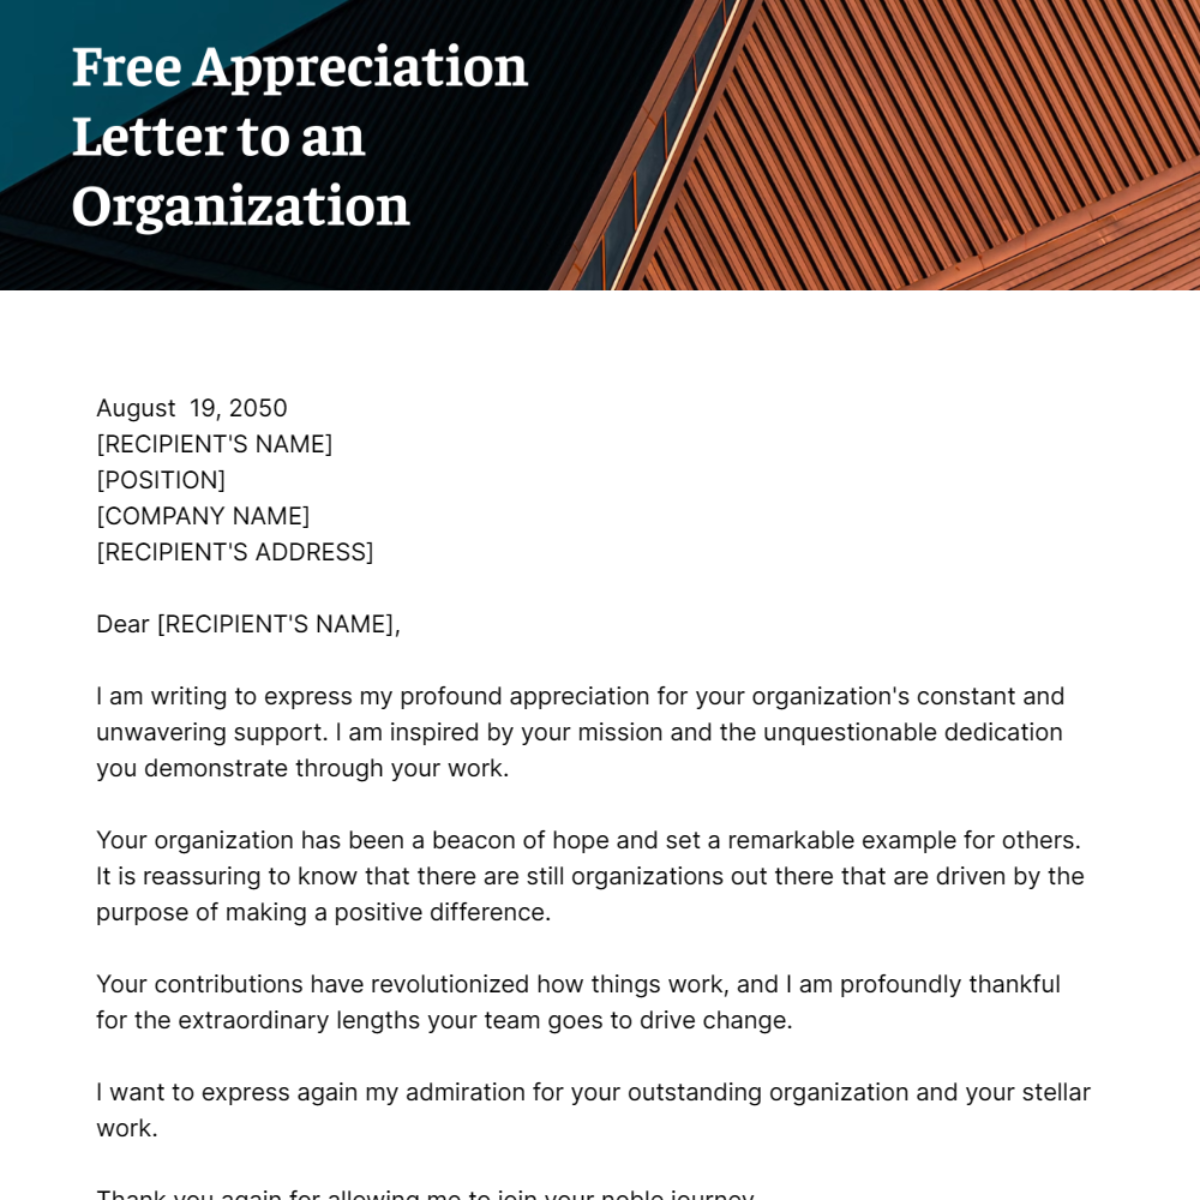 Appreciation Letter to an Organization Template